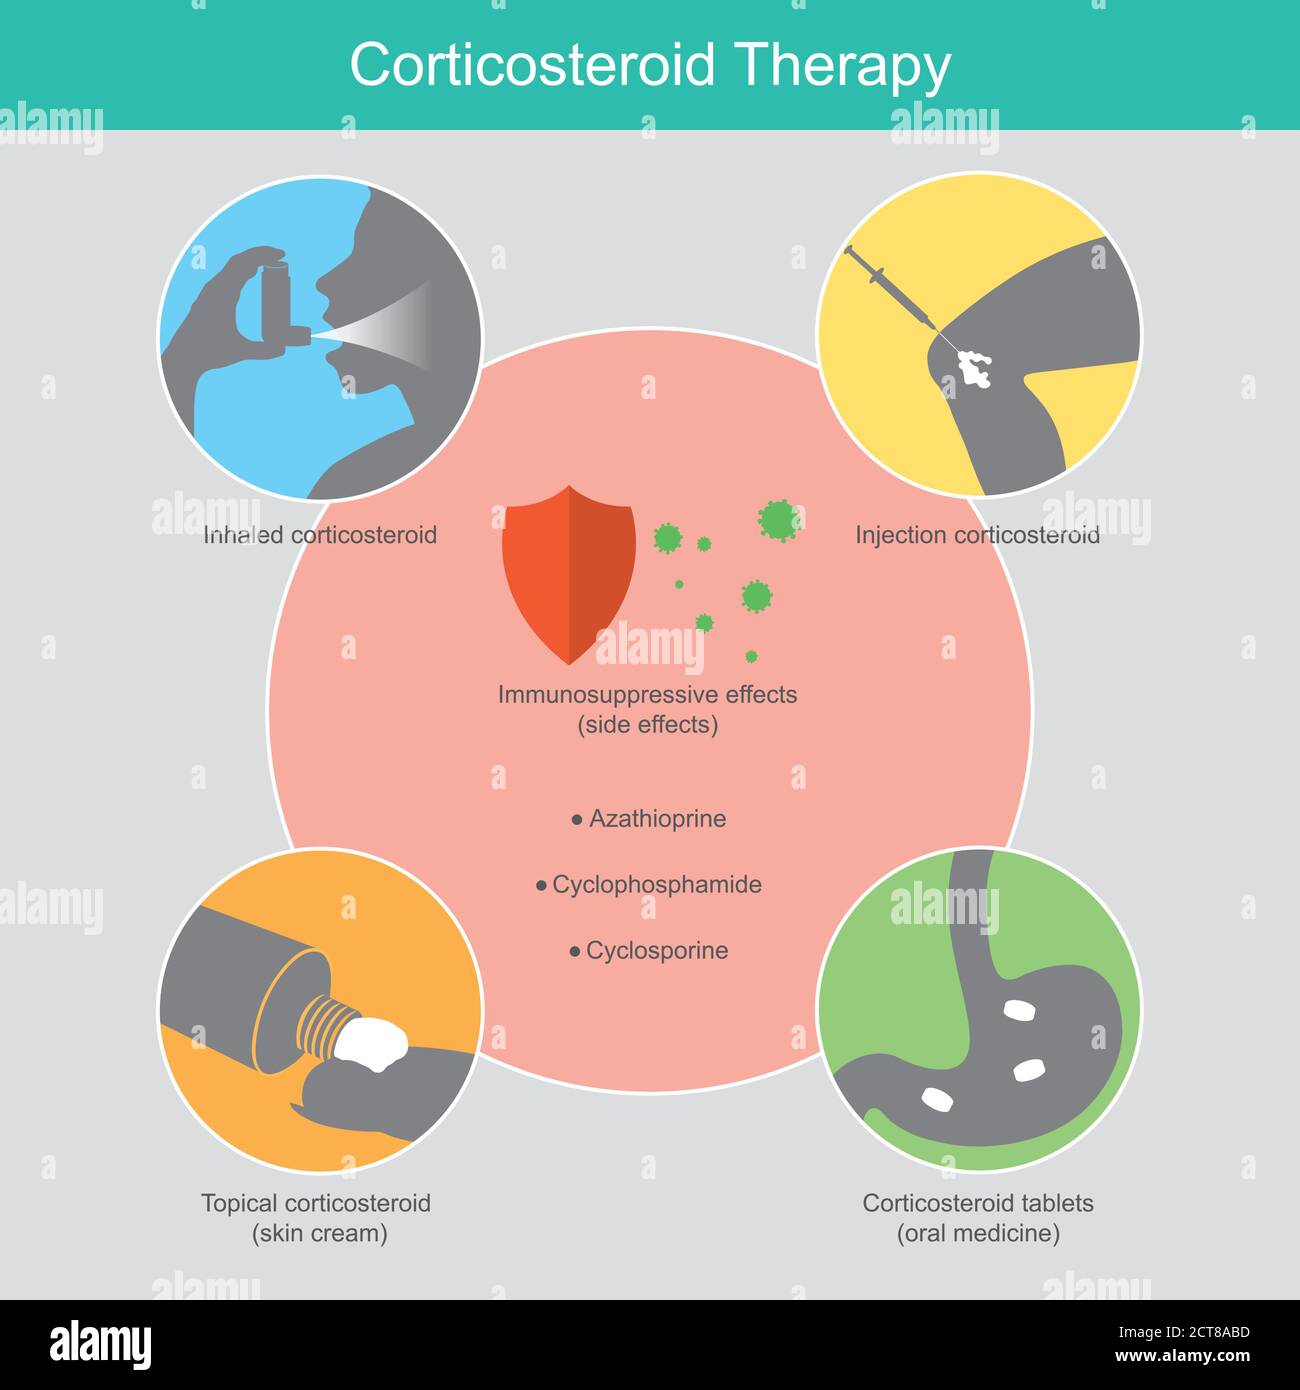 Corticosteroid Therapy. Illustration explain the therapy inflammatory disease in human by use synthetic. Stock Vector